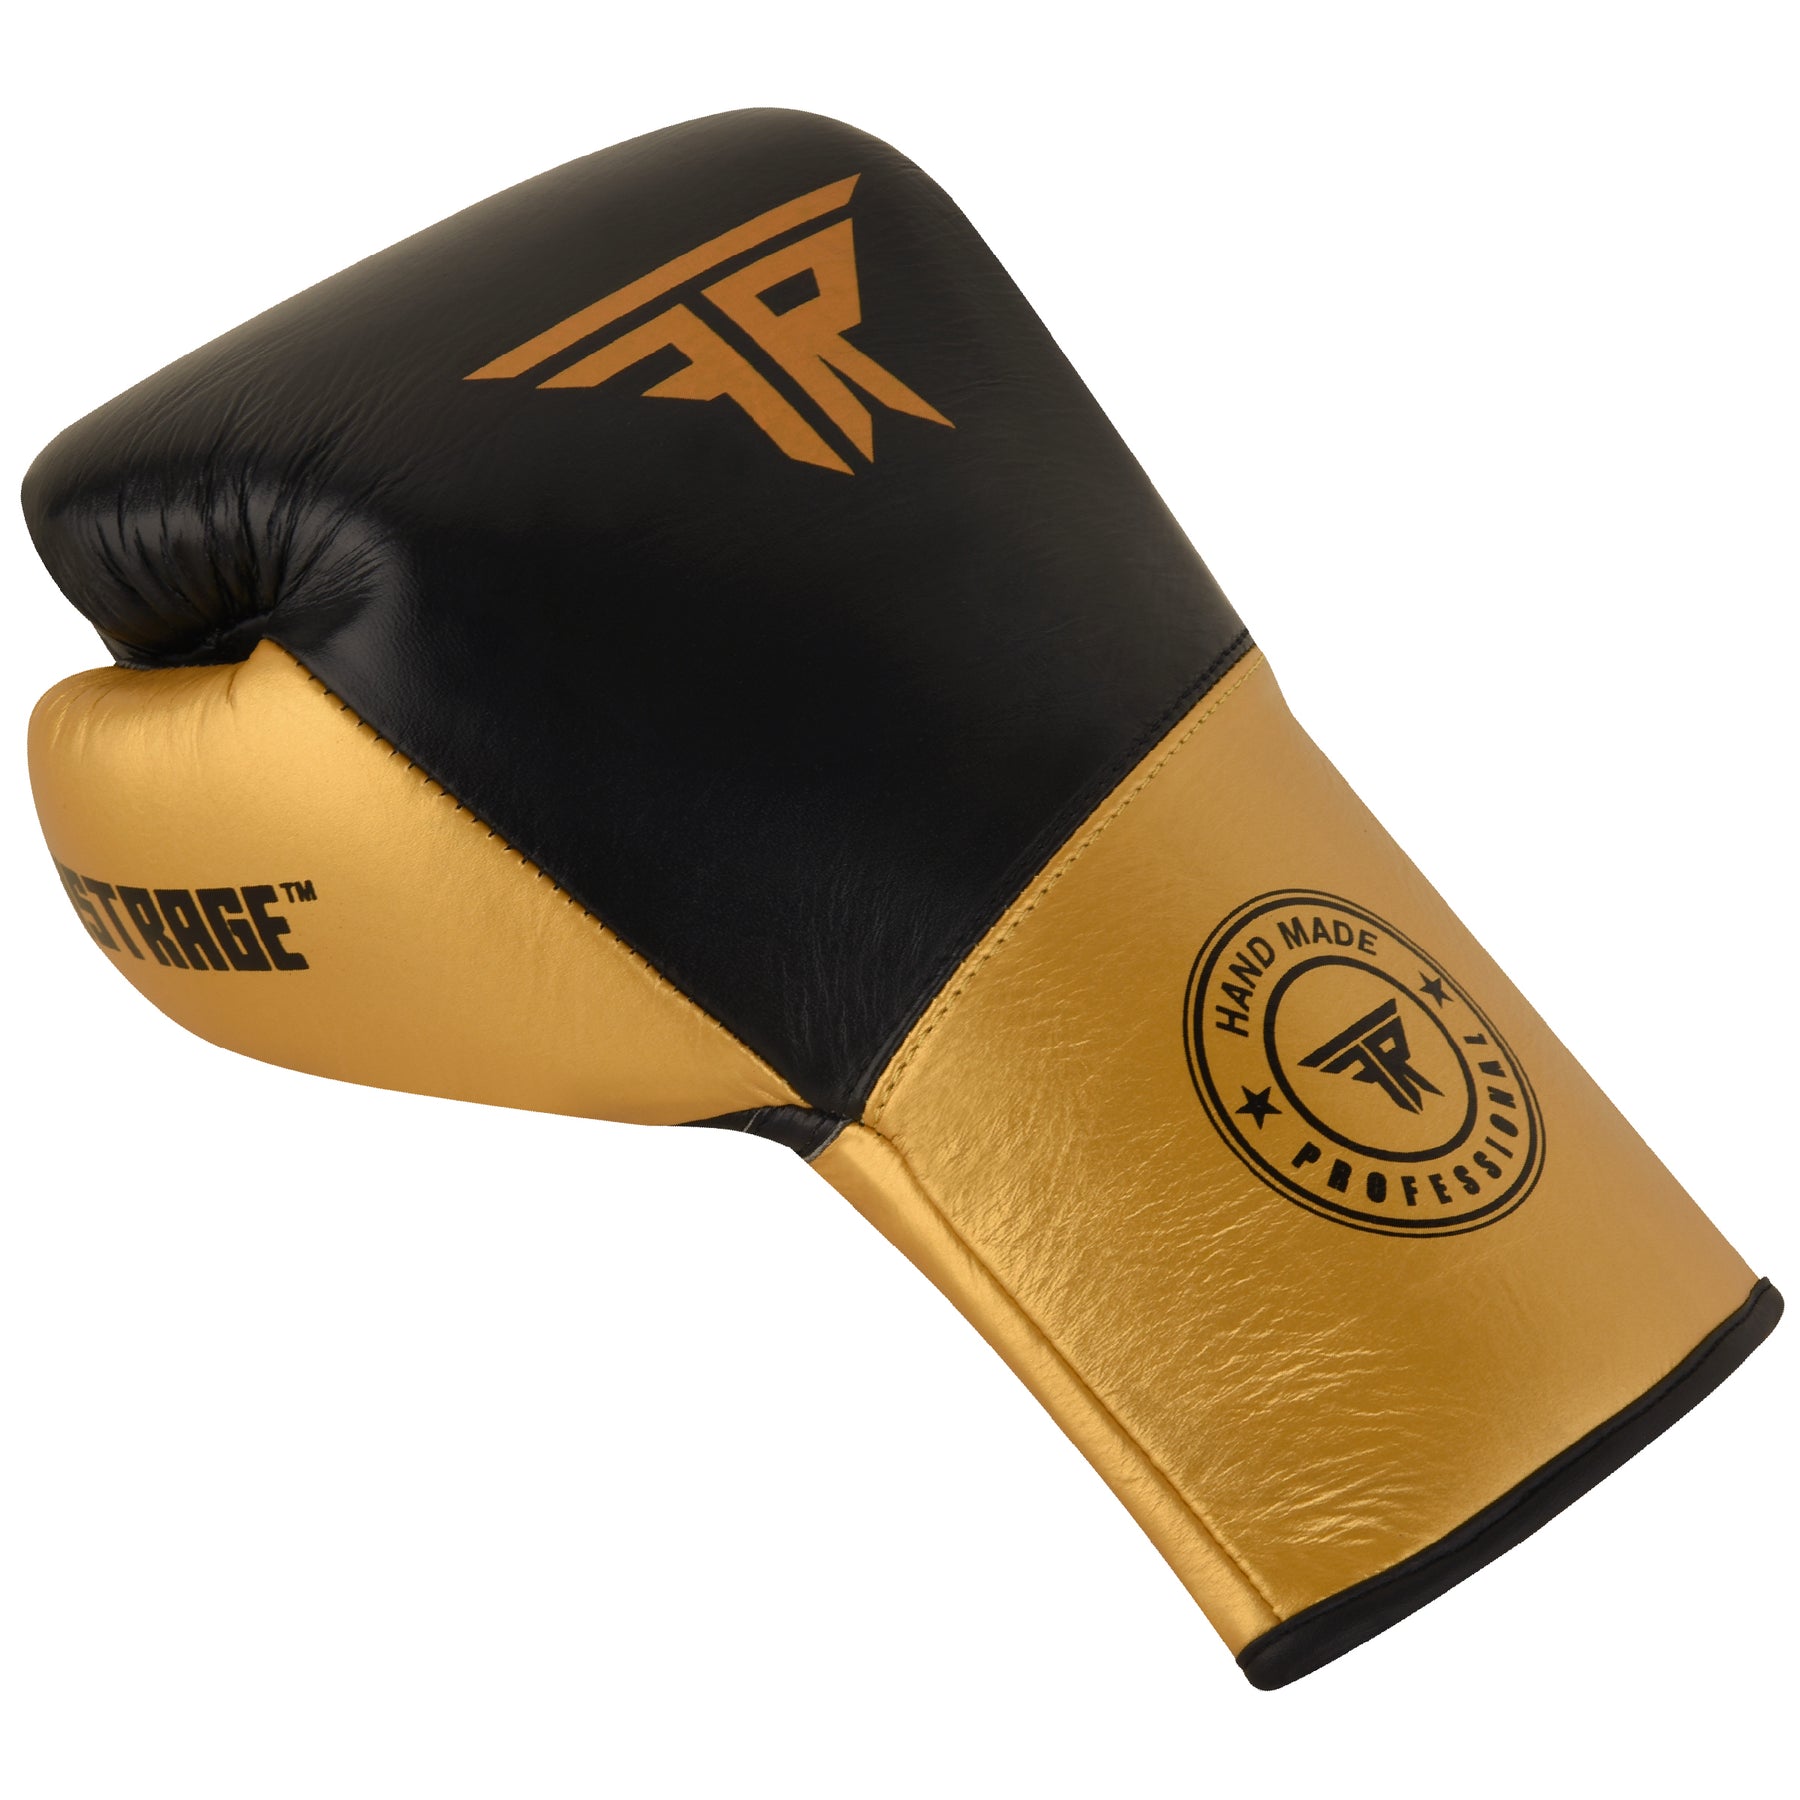 FR-52 Professional Leather Boxing Gloves - Black Gold